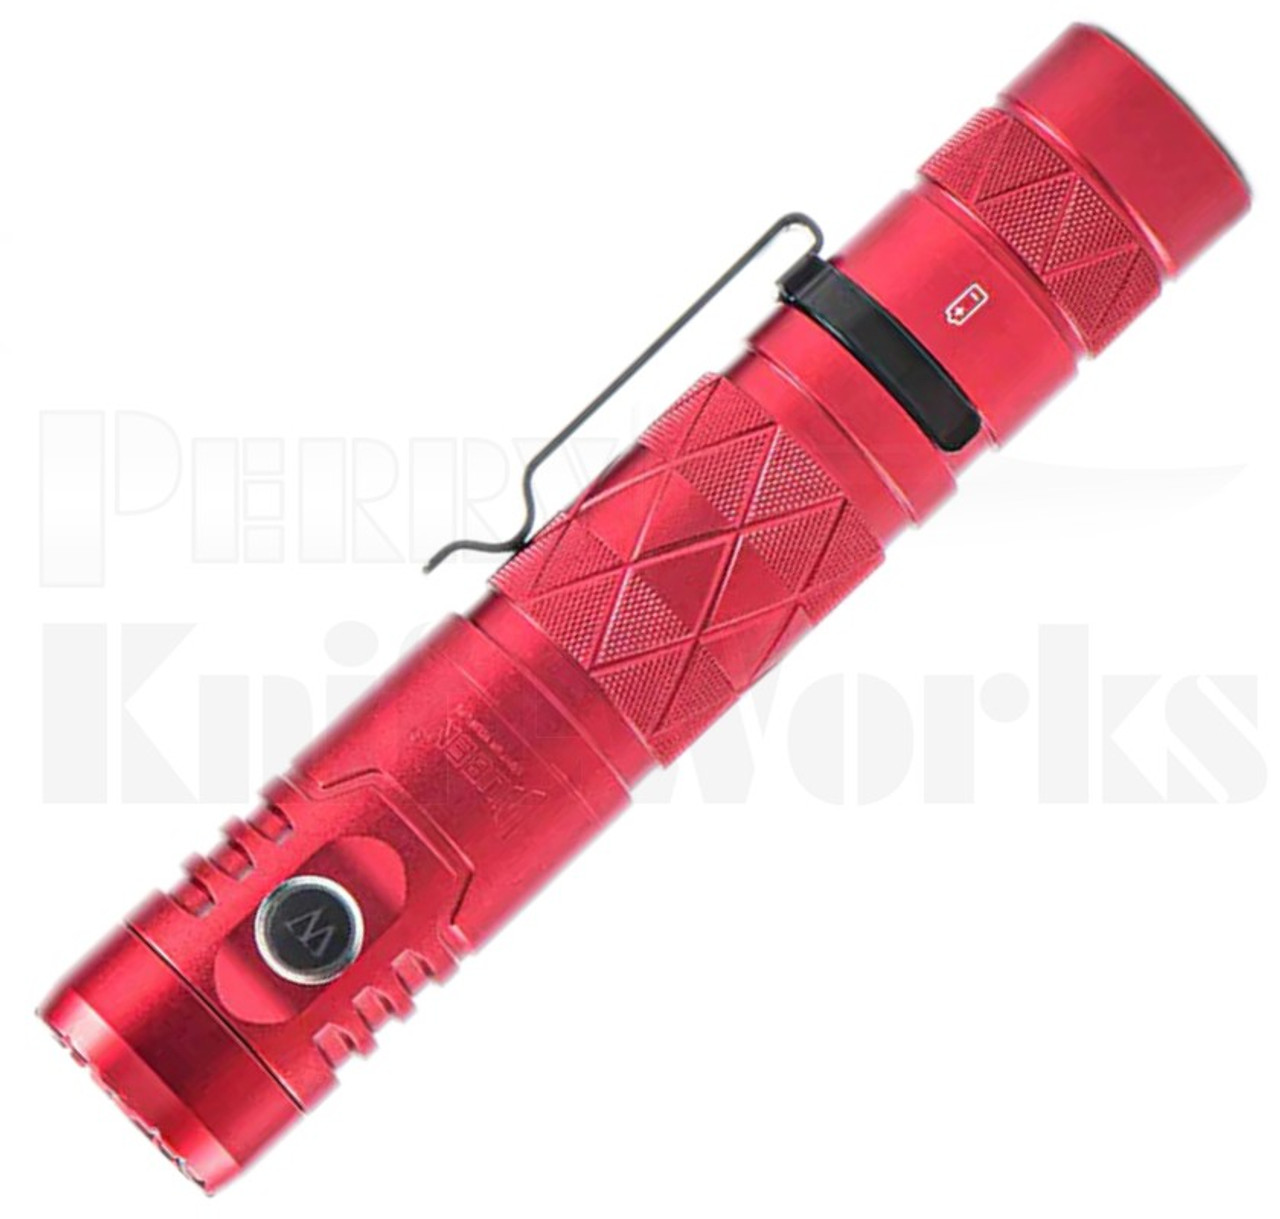 Wuben E12R Rechargeable LED Flashlight Red l 1200 Lumens l For Sale